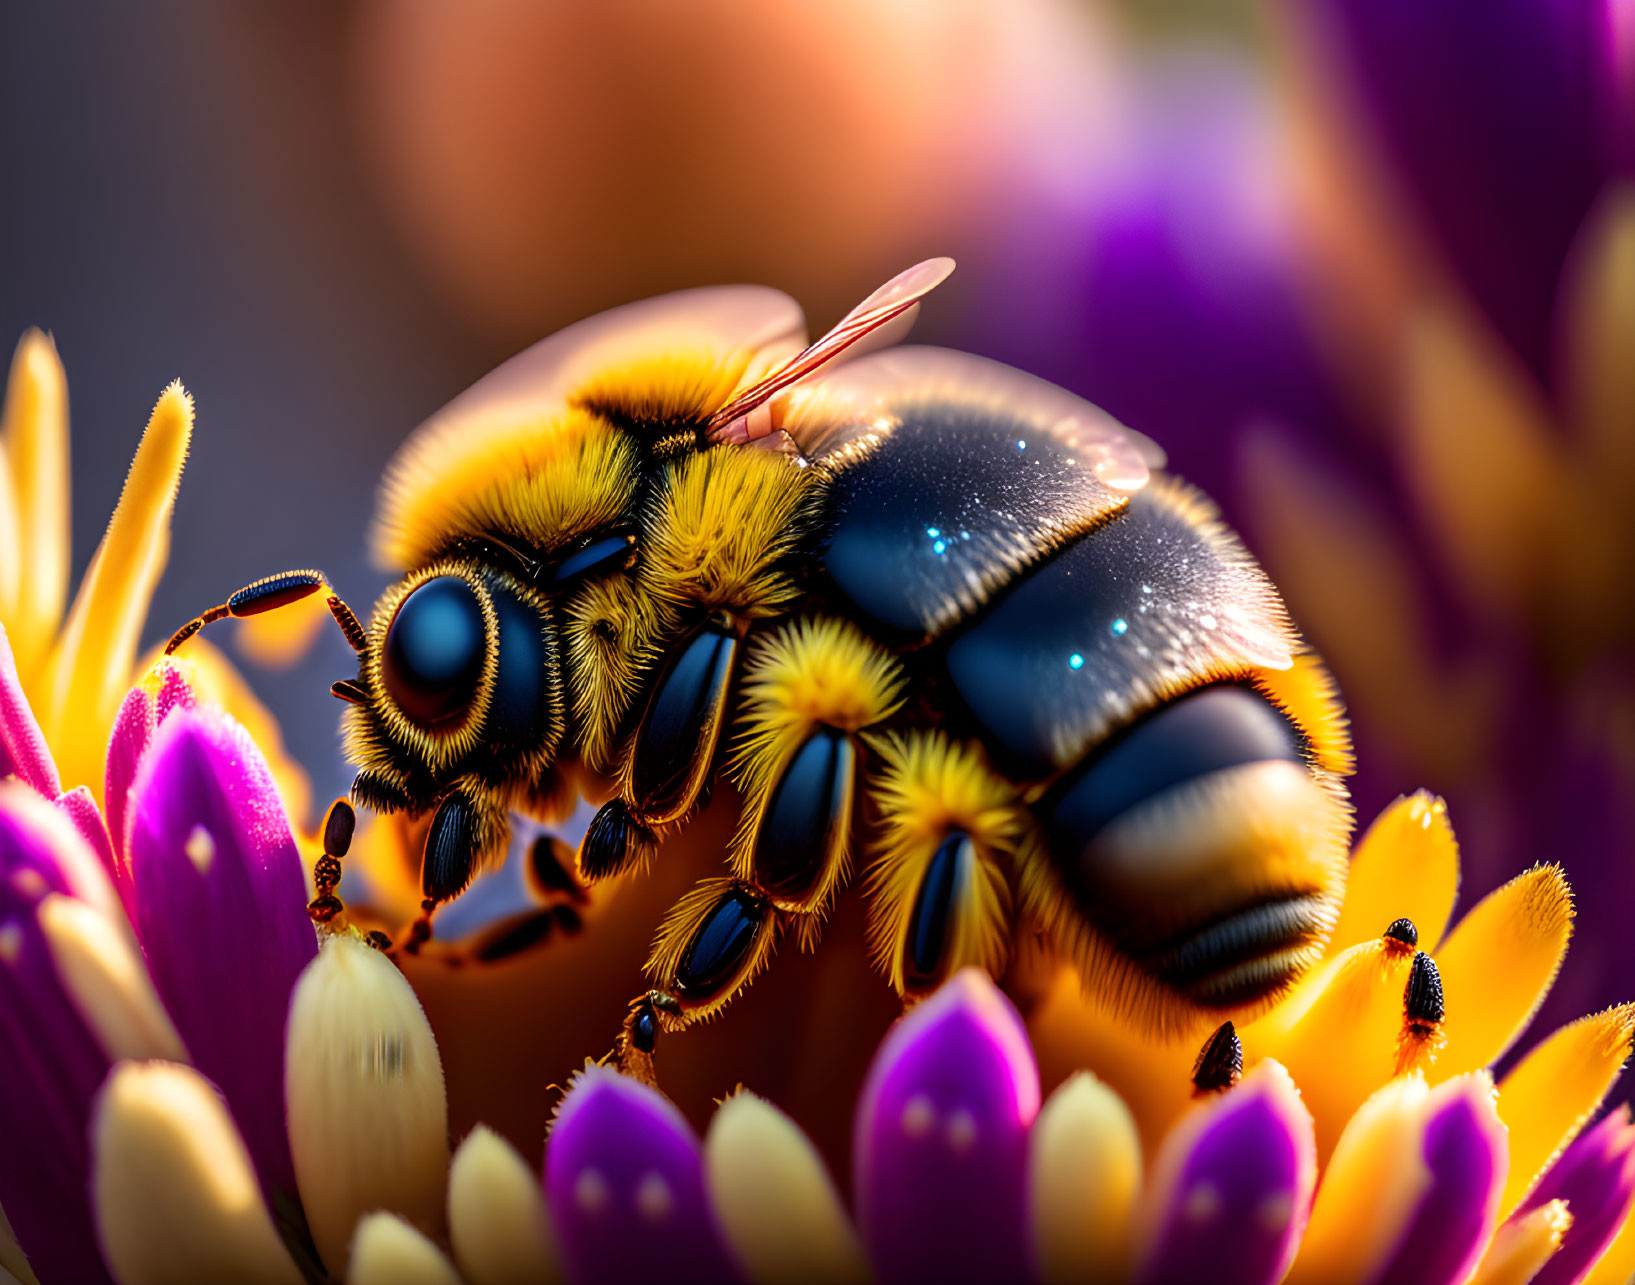 Macro shot of bee with translucent wings on purple and yellow flowers.